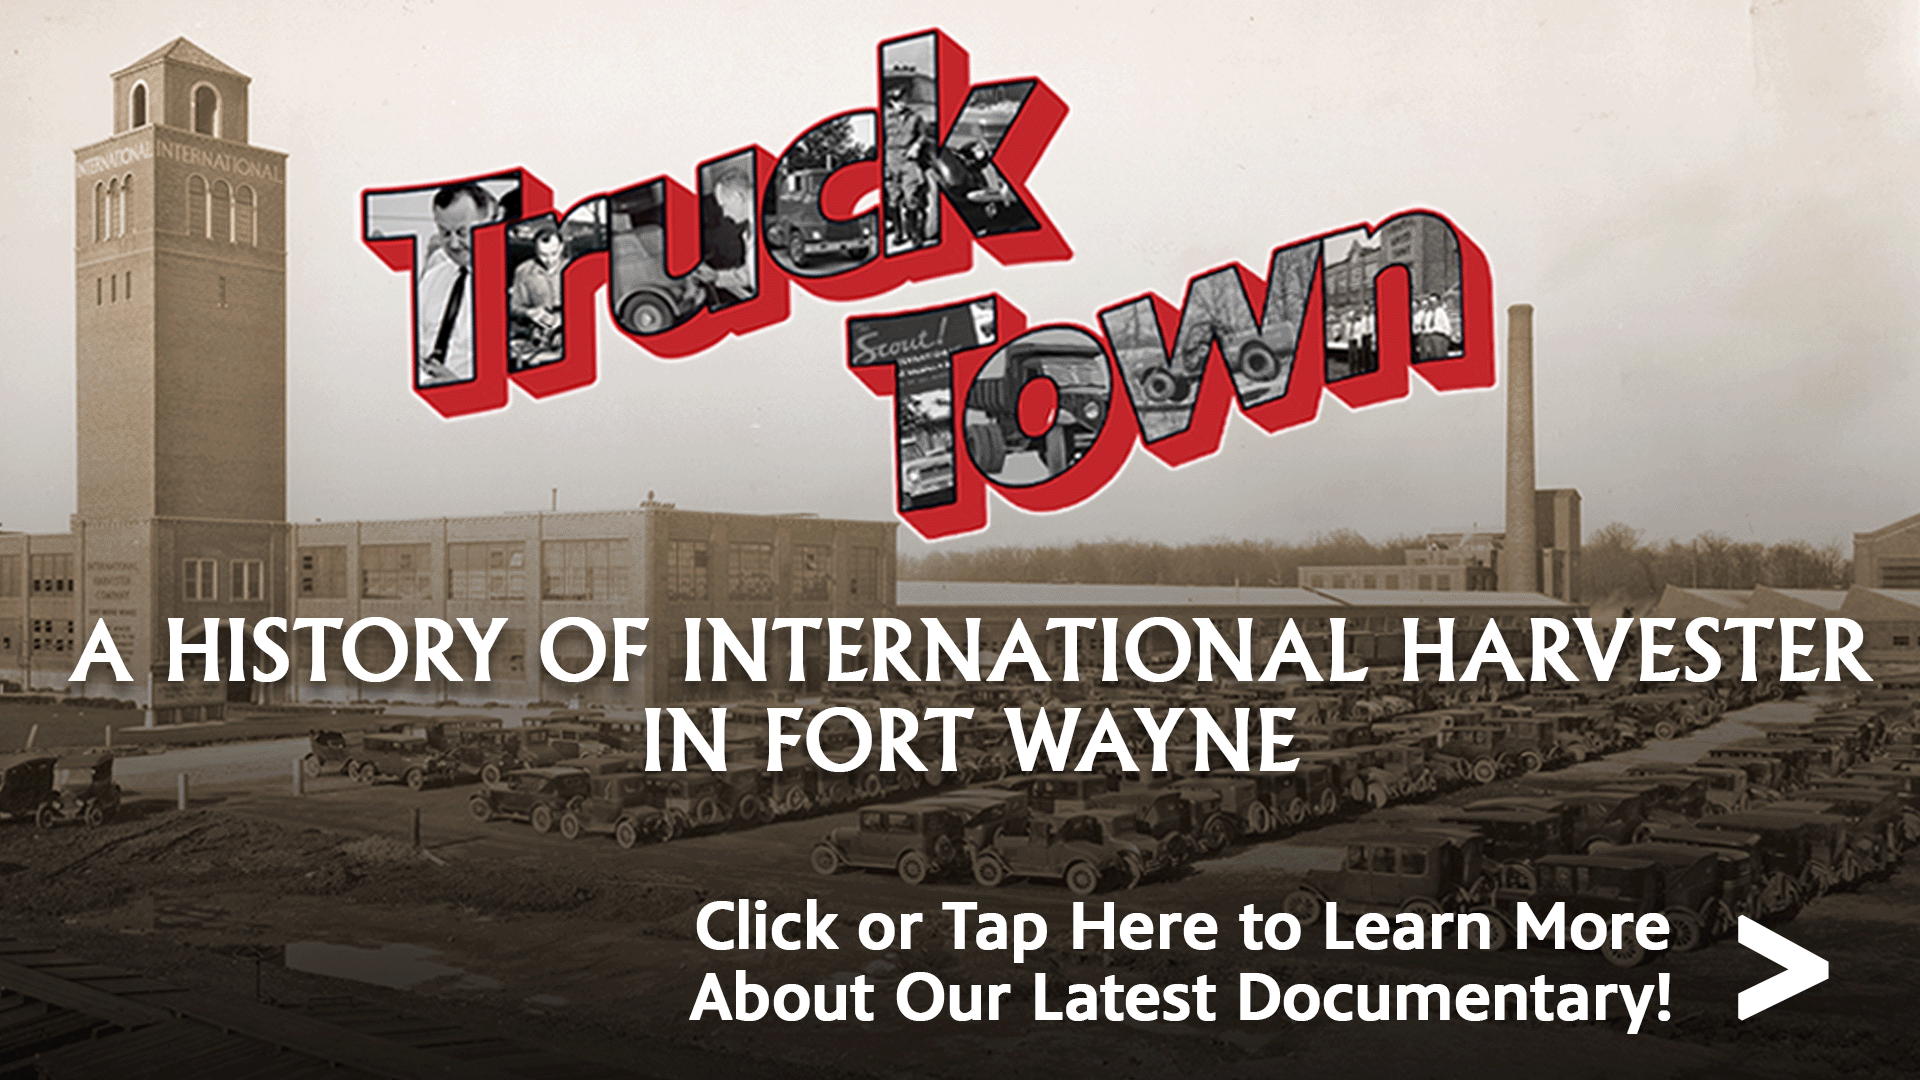 earn more about TRUCK TOWN, our latest Documentary